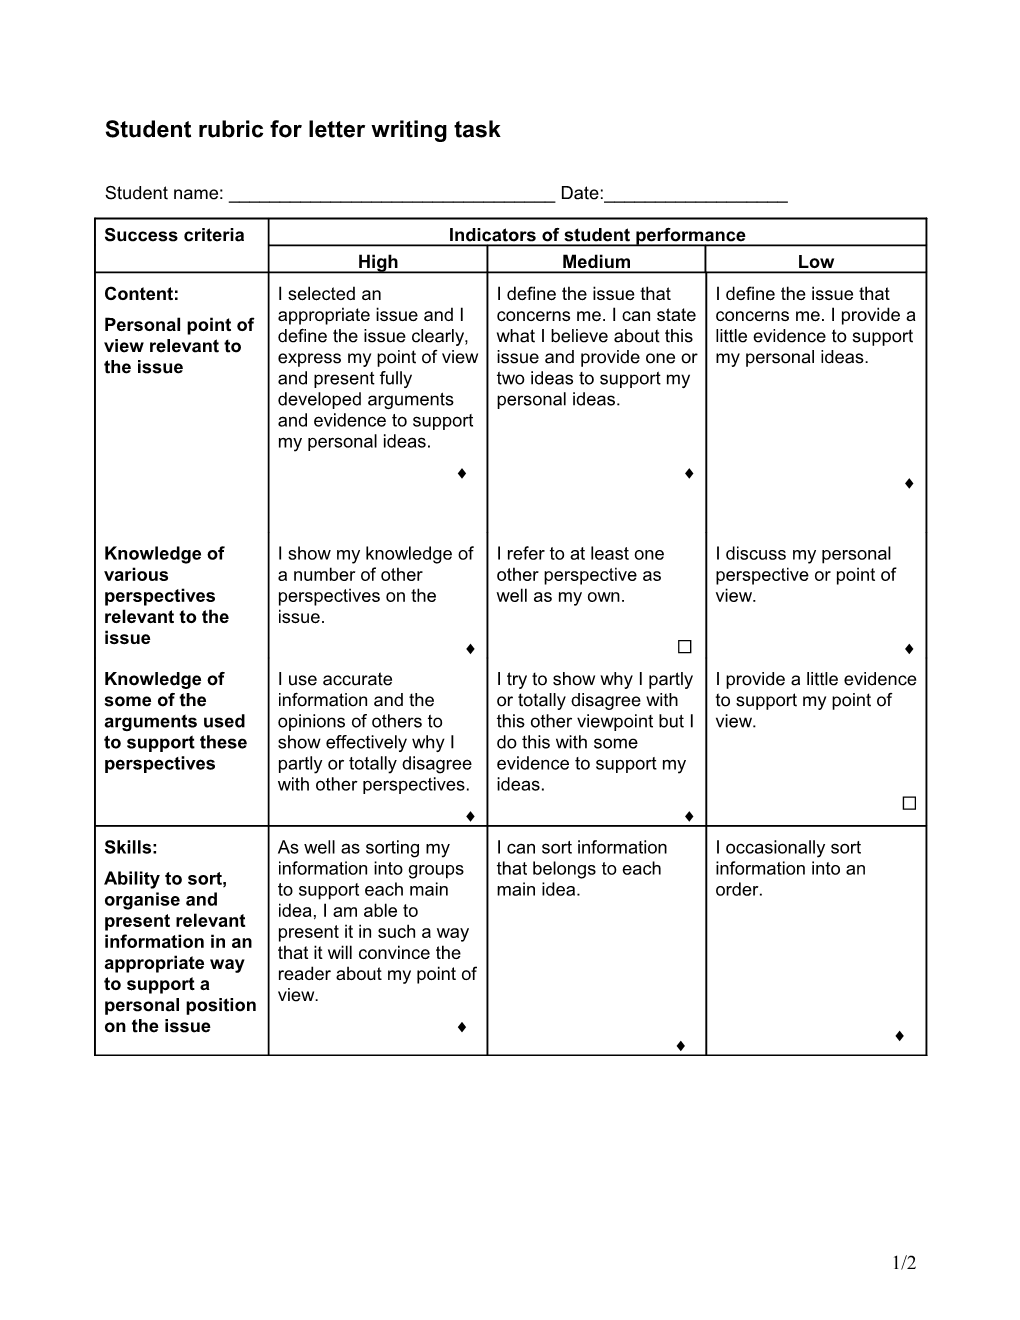 Student Rubric for Letter Writing Task